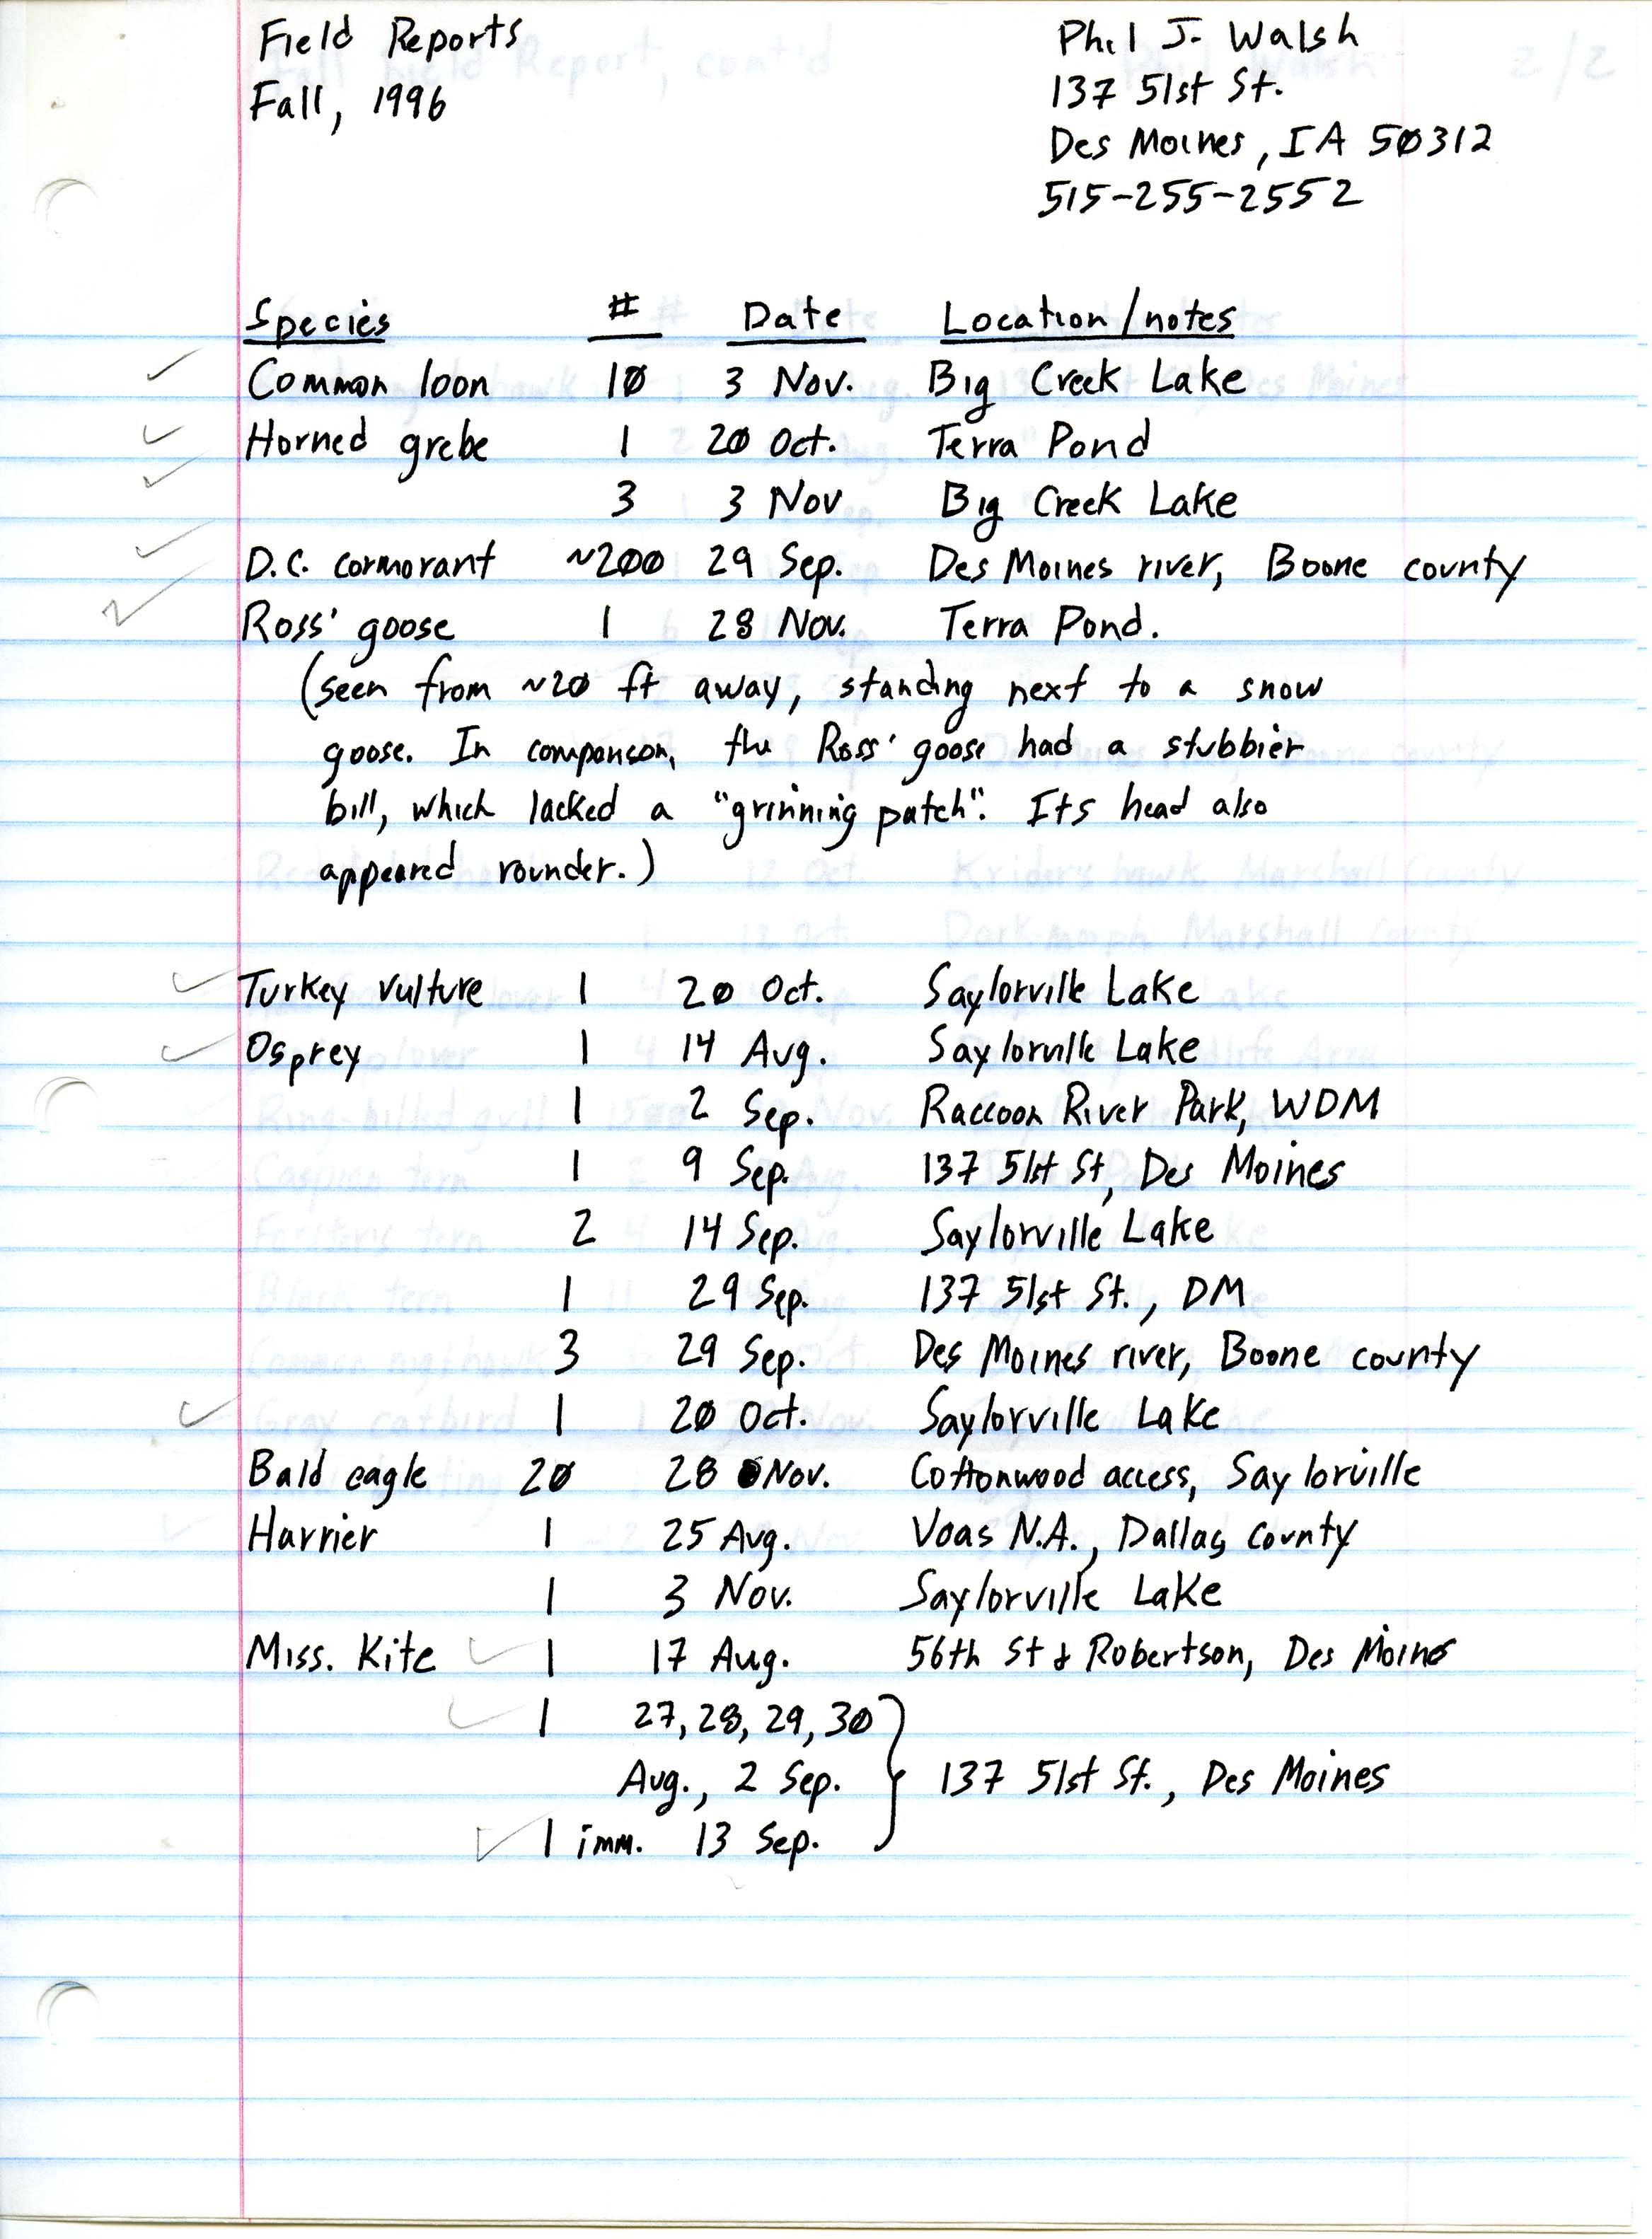 Field notes contributed by Philip J. Walsh, fall 1996